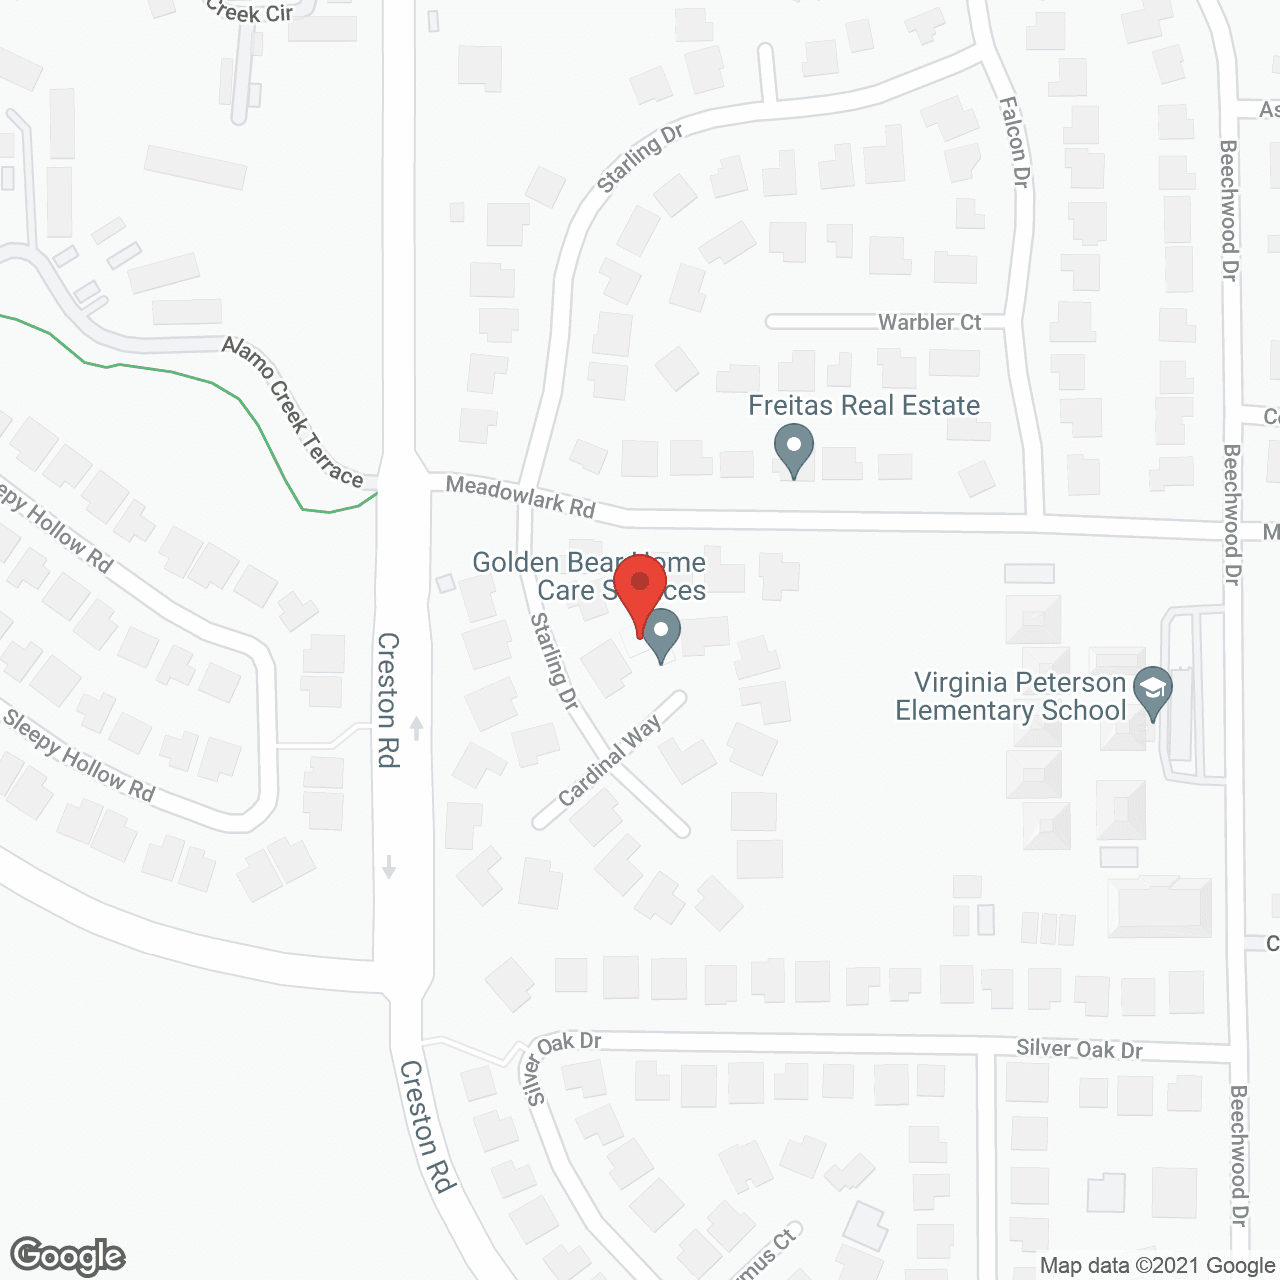 Golden Bear Home Care Services RCFE in google map